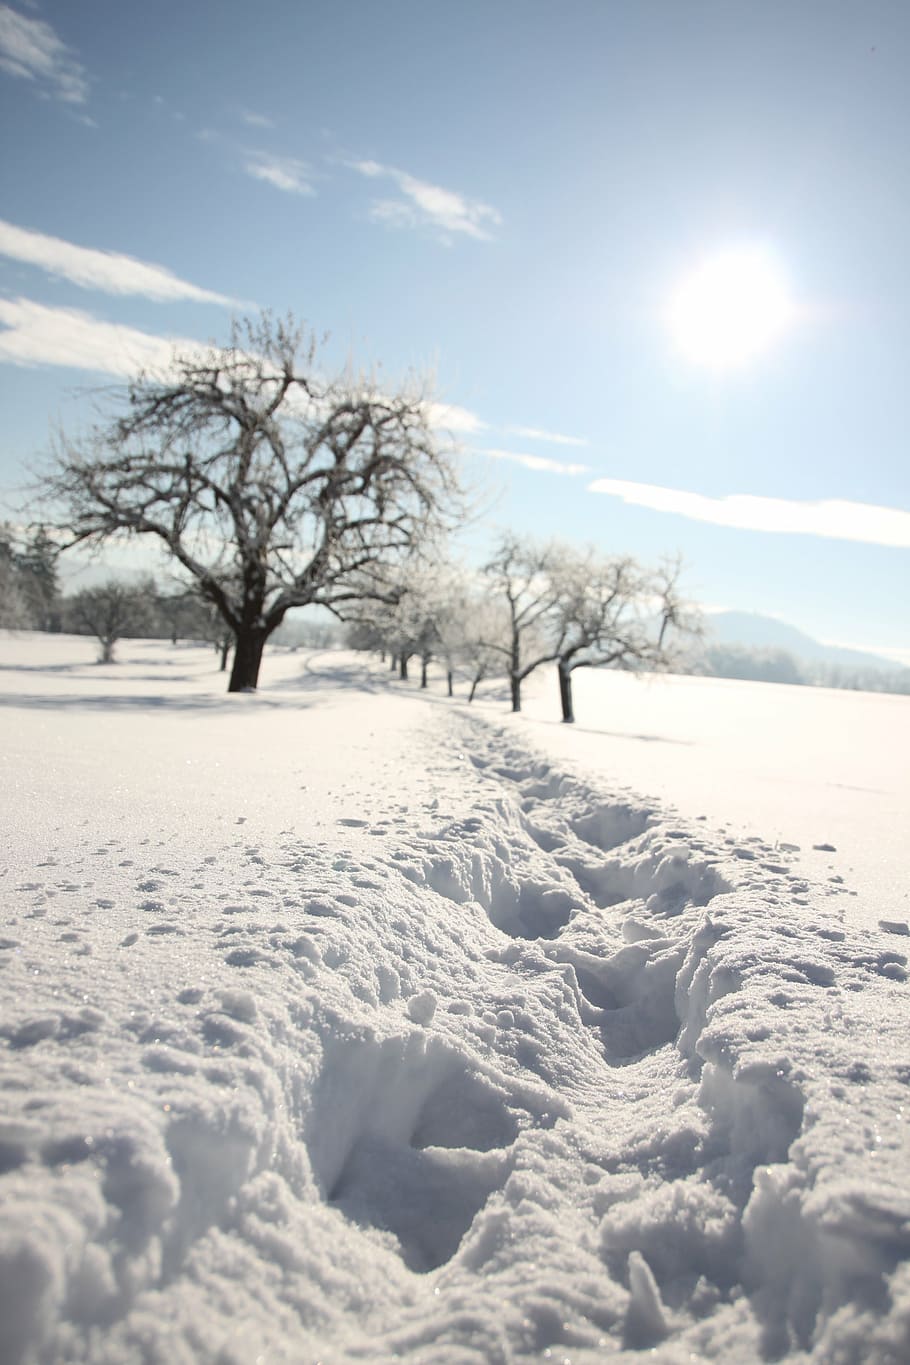 snow, traces, winter, snow tramp, cold temperature, sky, tranquility, beauty in nature, white color, tree